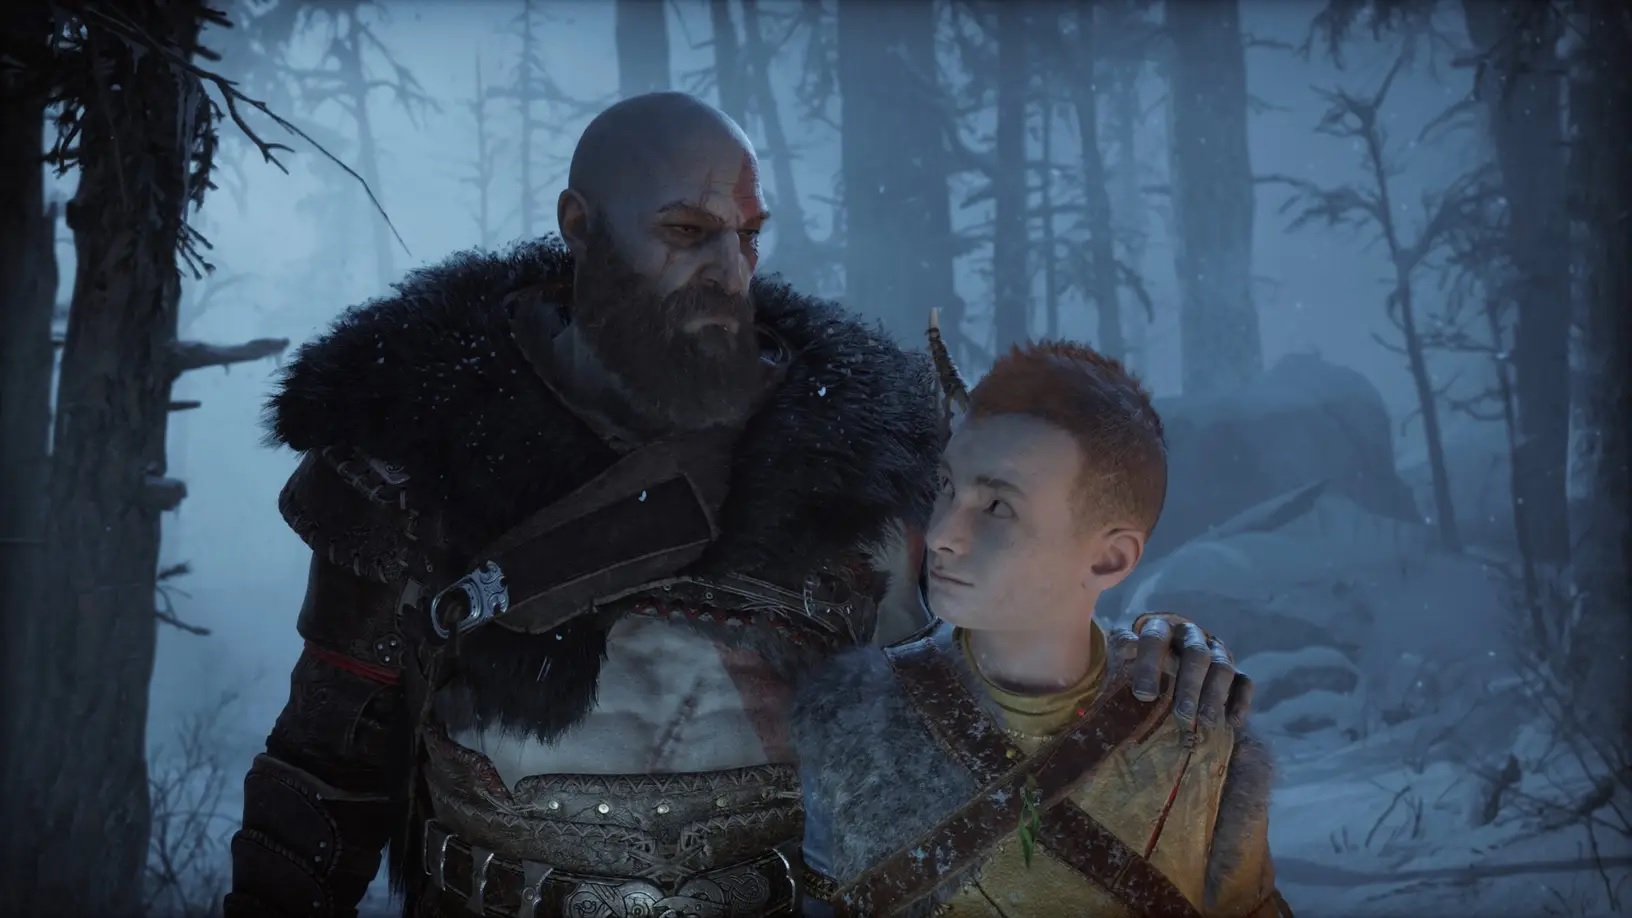 God of War 2 may debut simultaneously with Sony PS5 